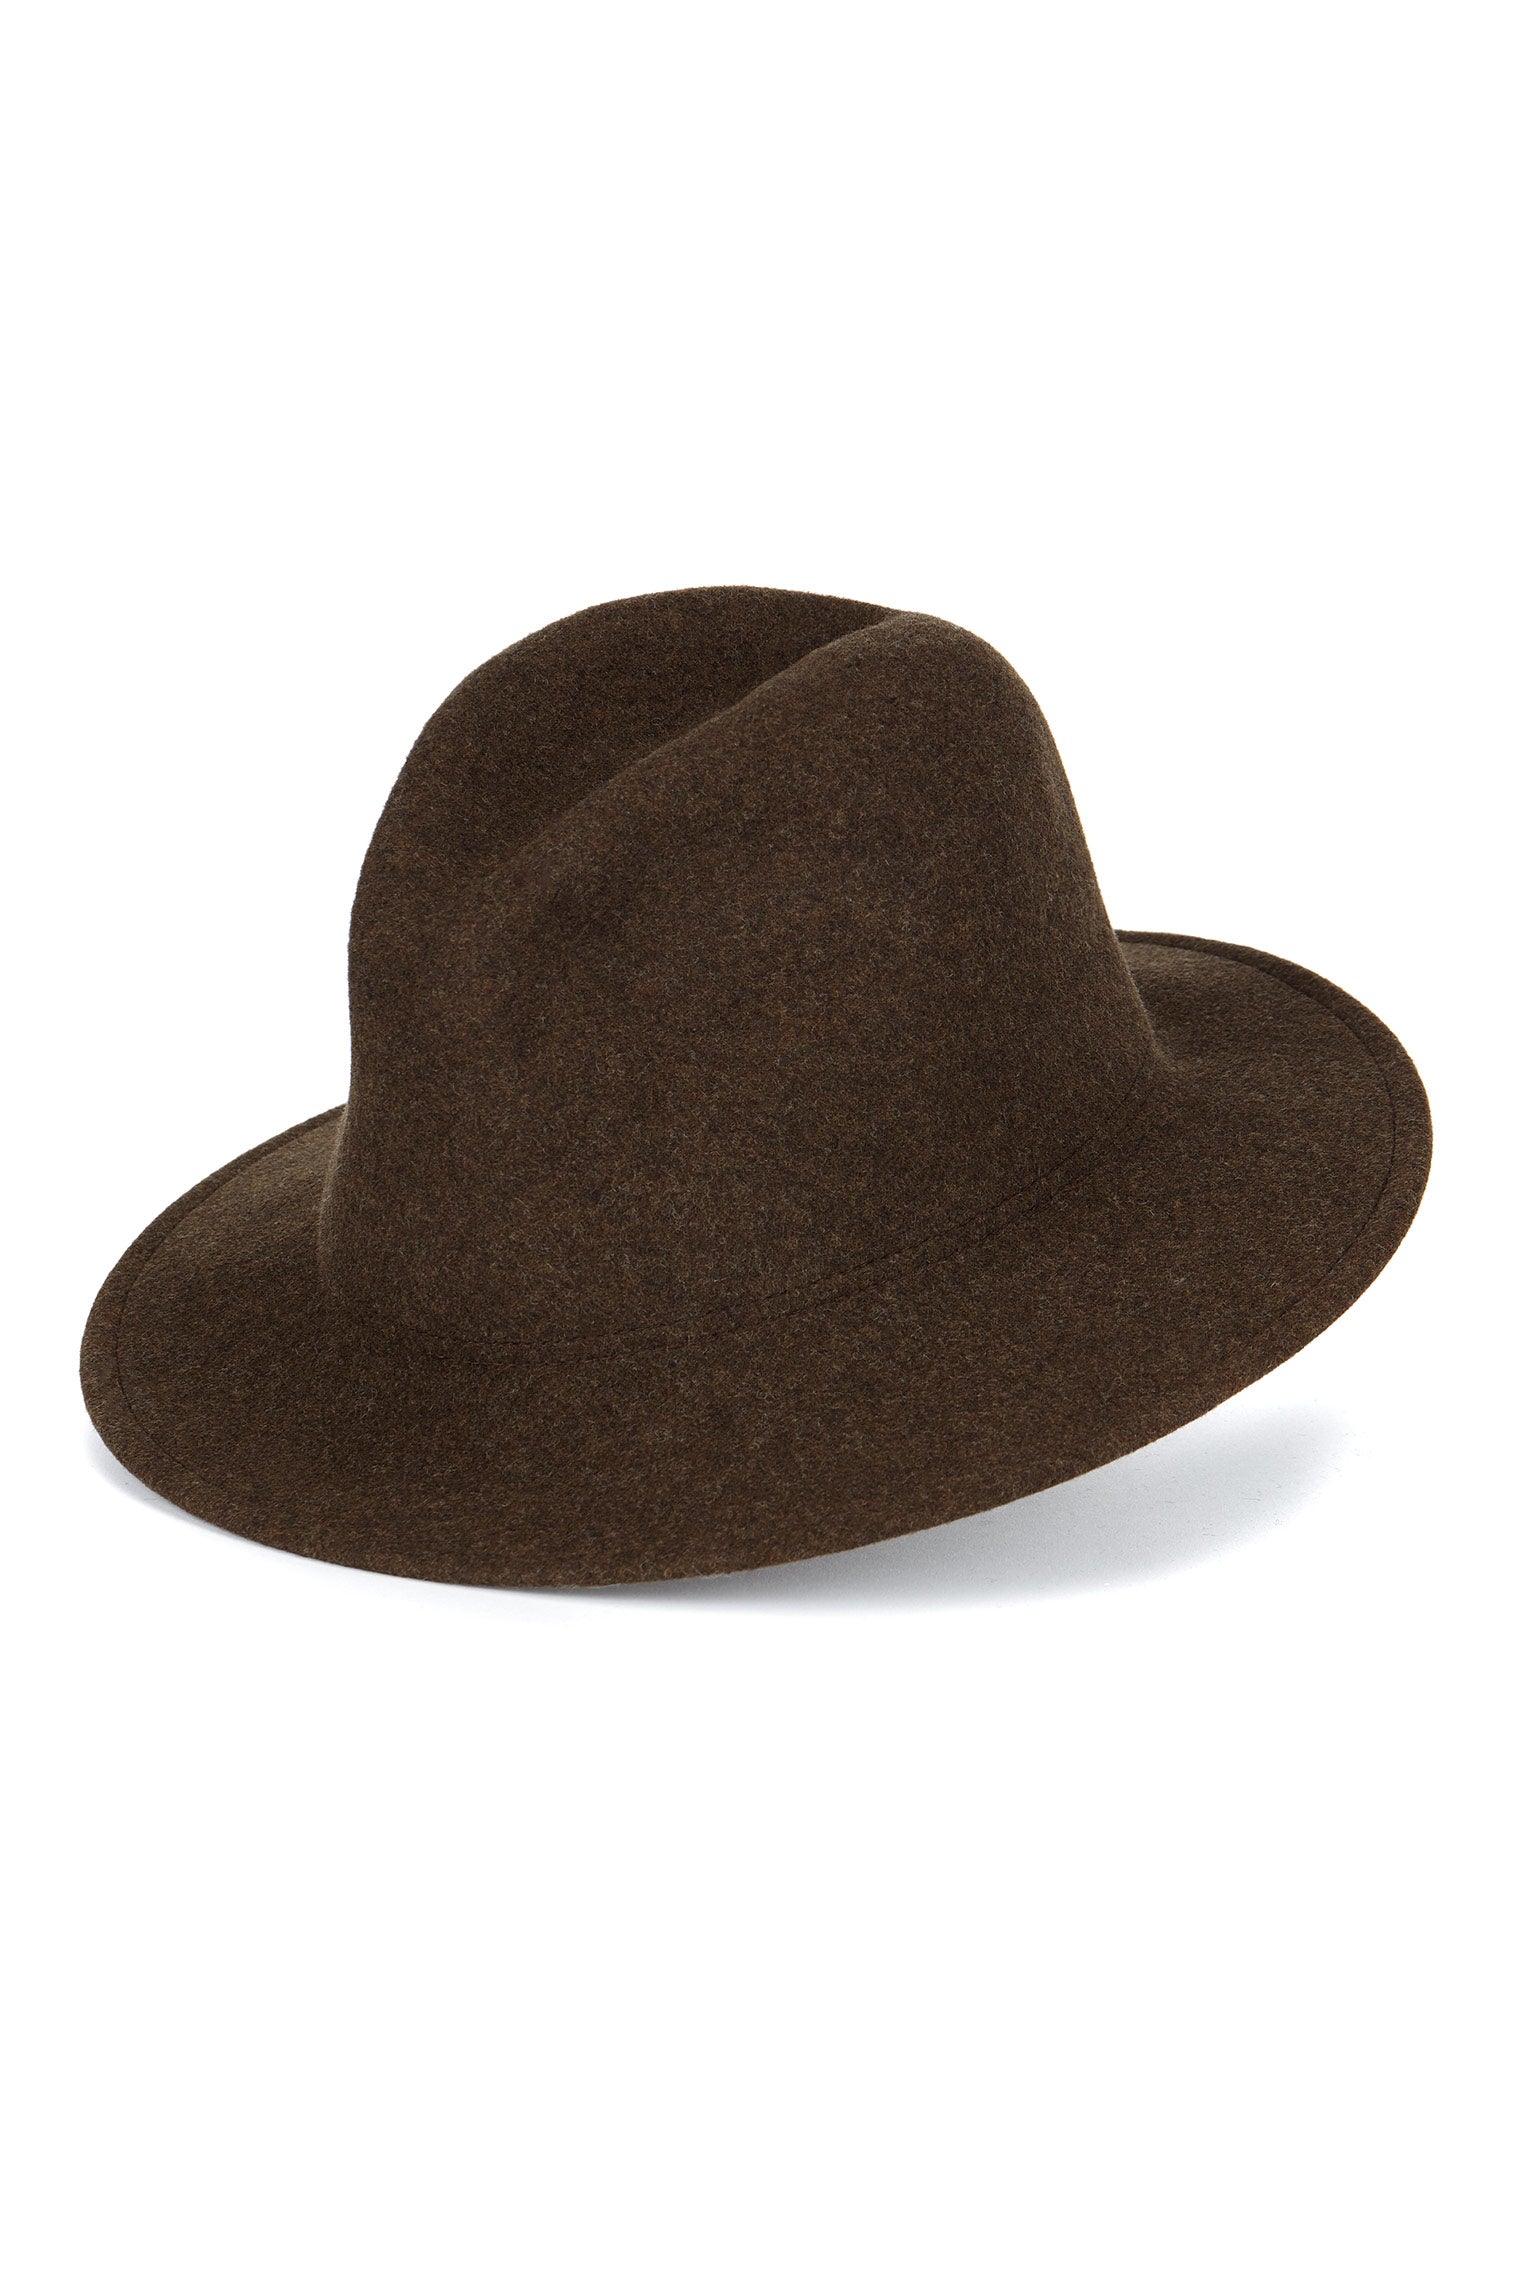 Rambler Rollable Trilby - Hats for Heart-shaped Face Shapes - Lock & Co. Hatters London UK